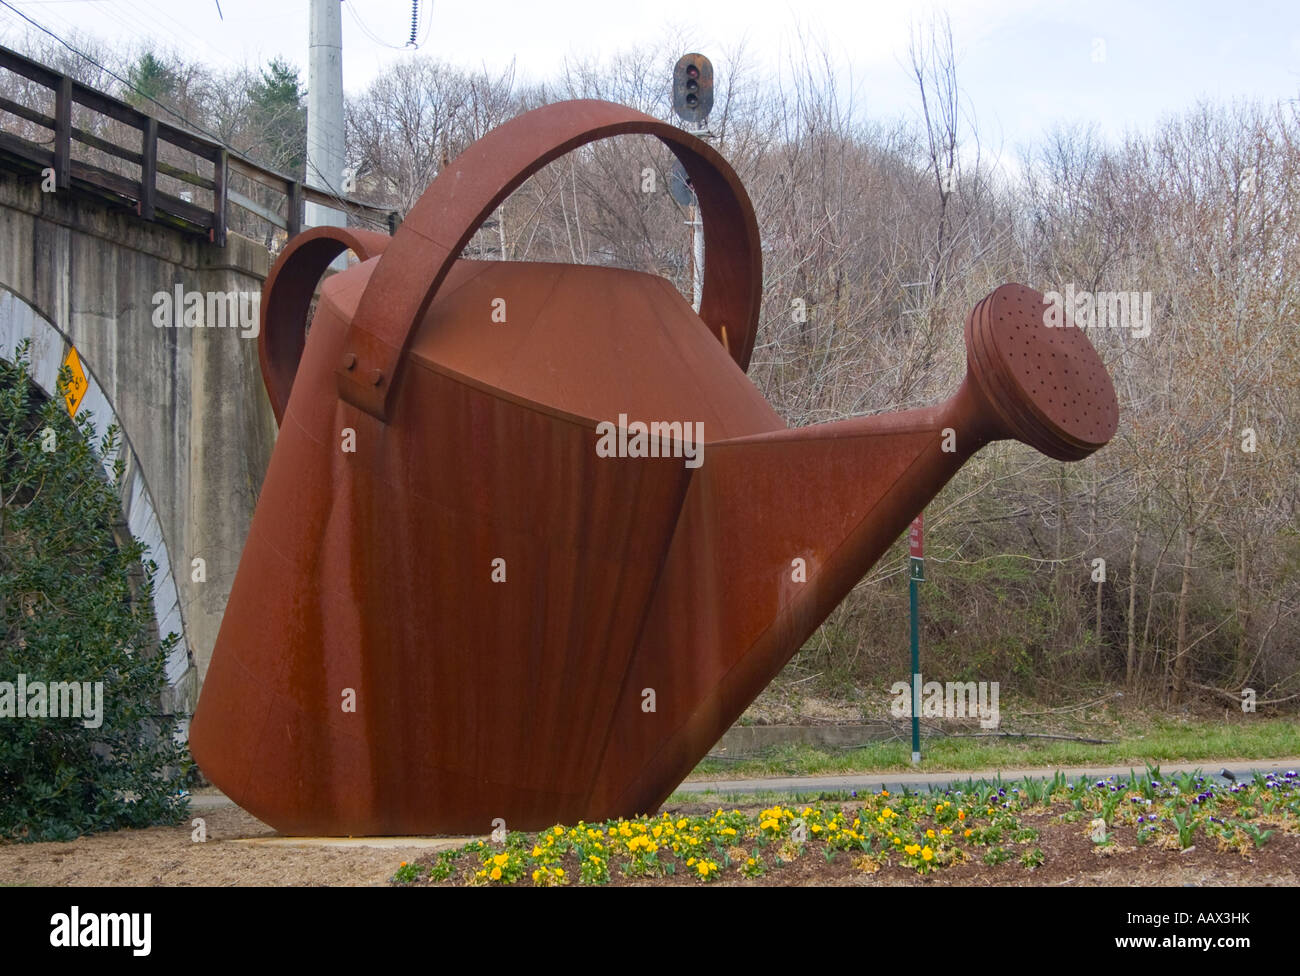 Giant Watering Can at an intersection in Staunton Virginia Stock Photo